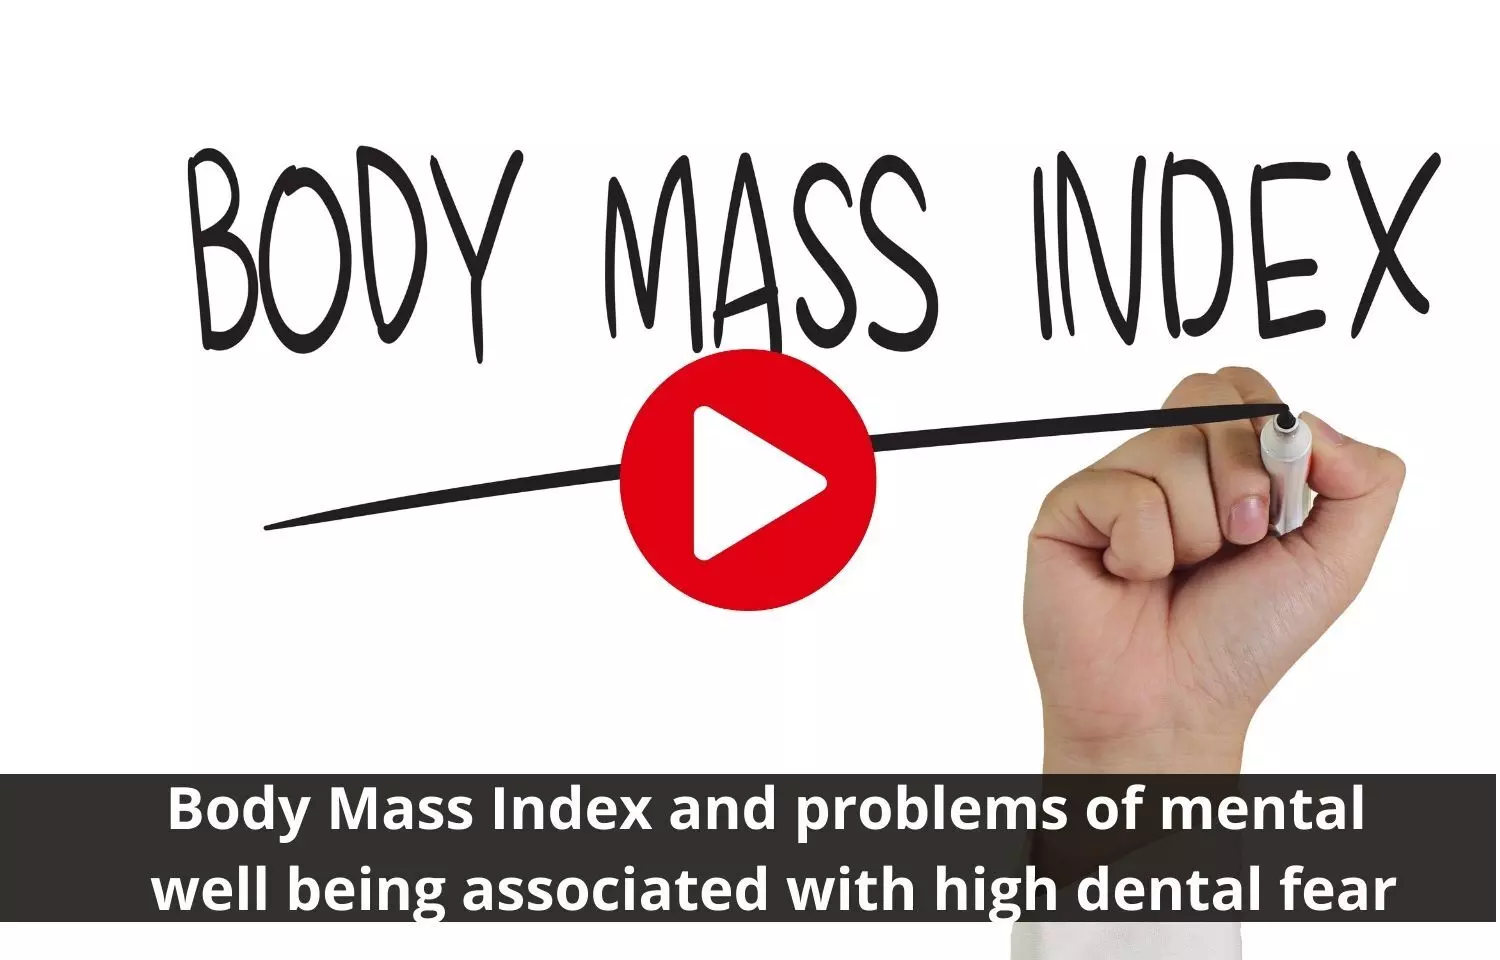 BMI, mental well being problems tied to increased dental fear